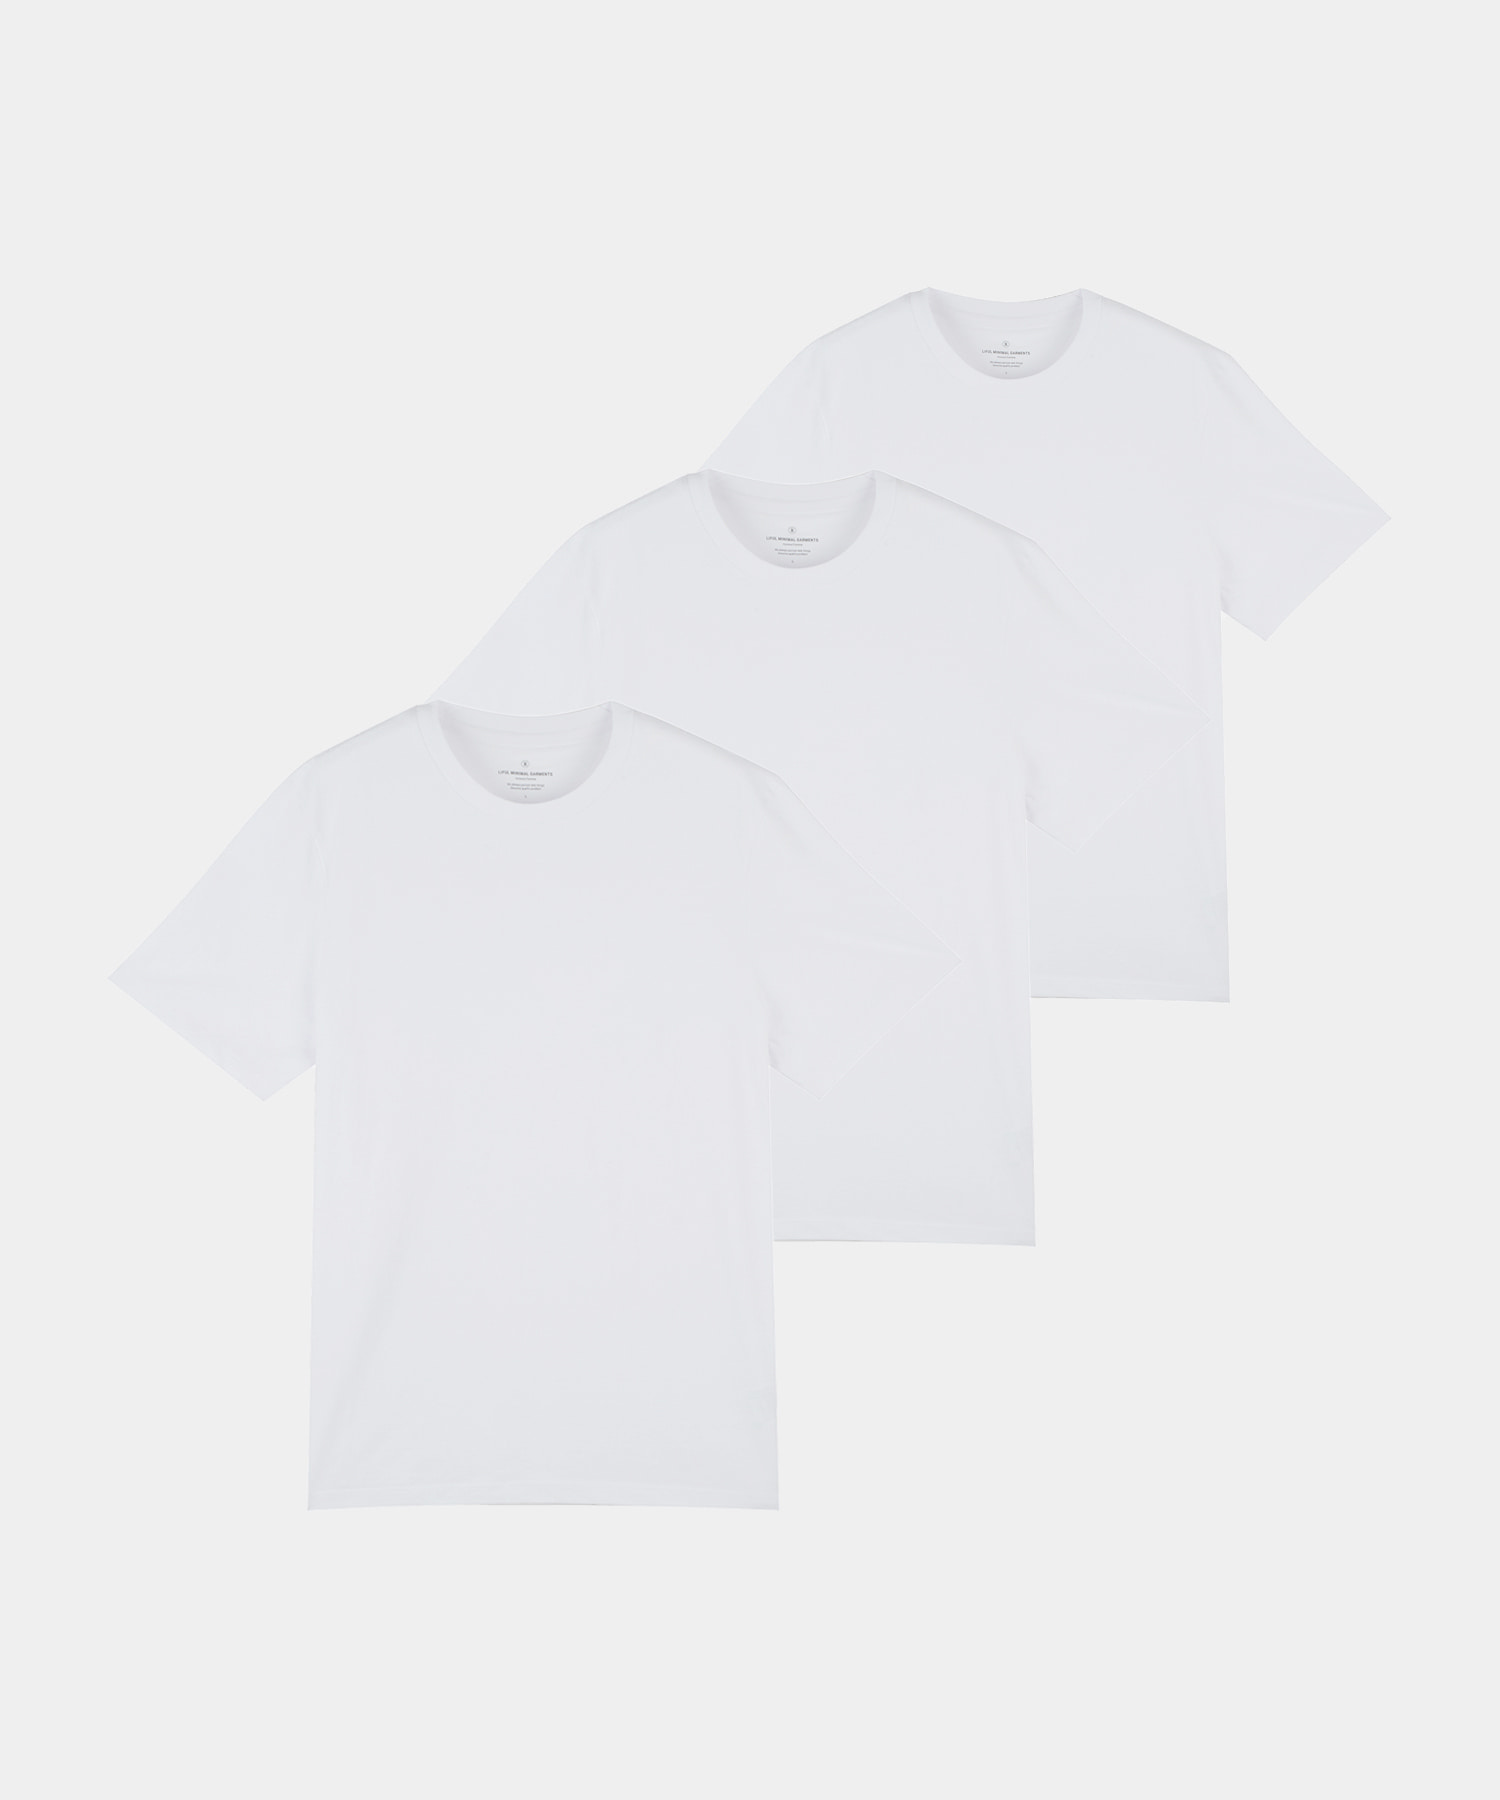 3PACK NEW STANDARD BASIC FIT TEE PACKAGE white